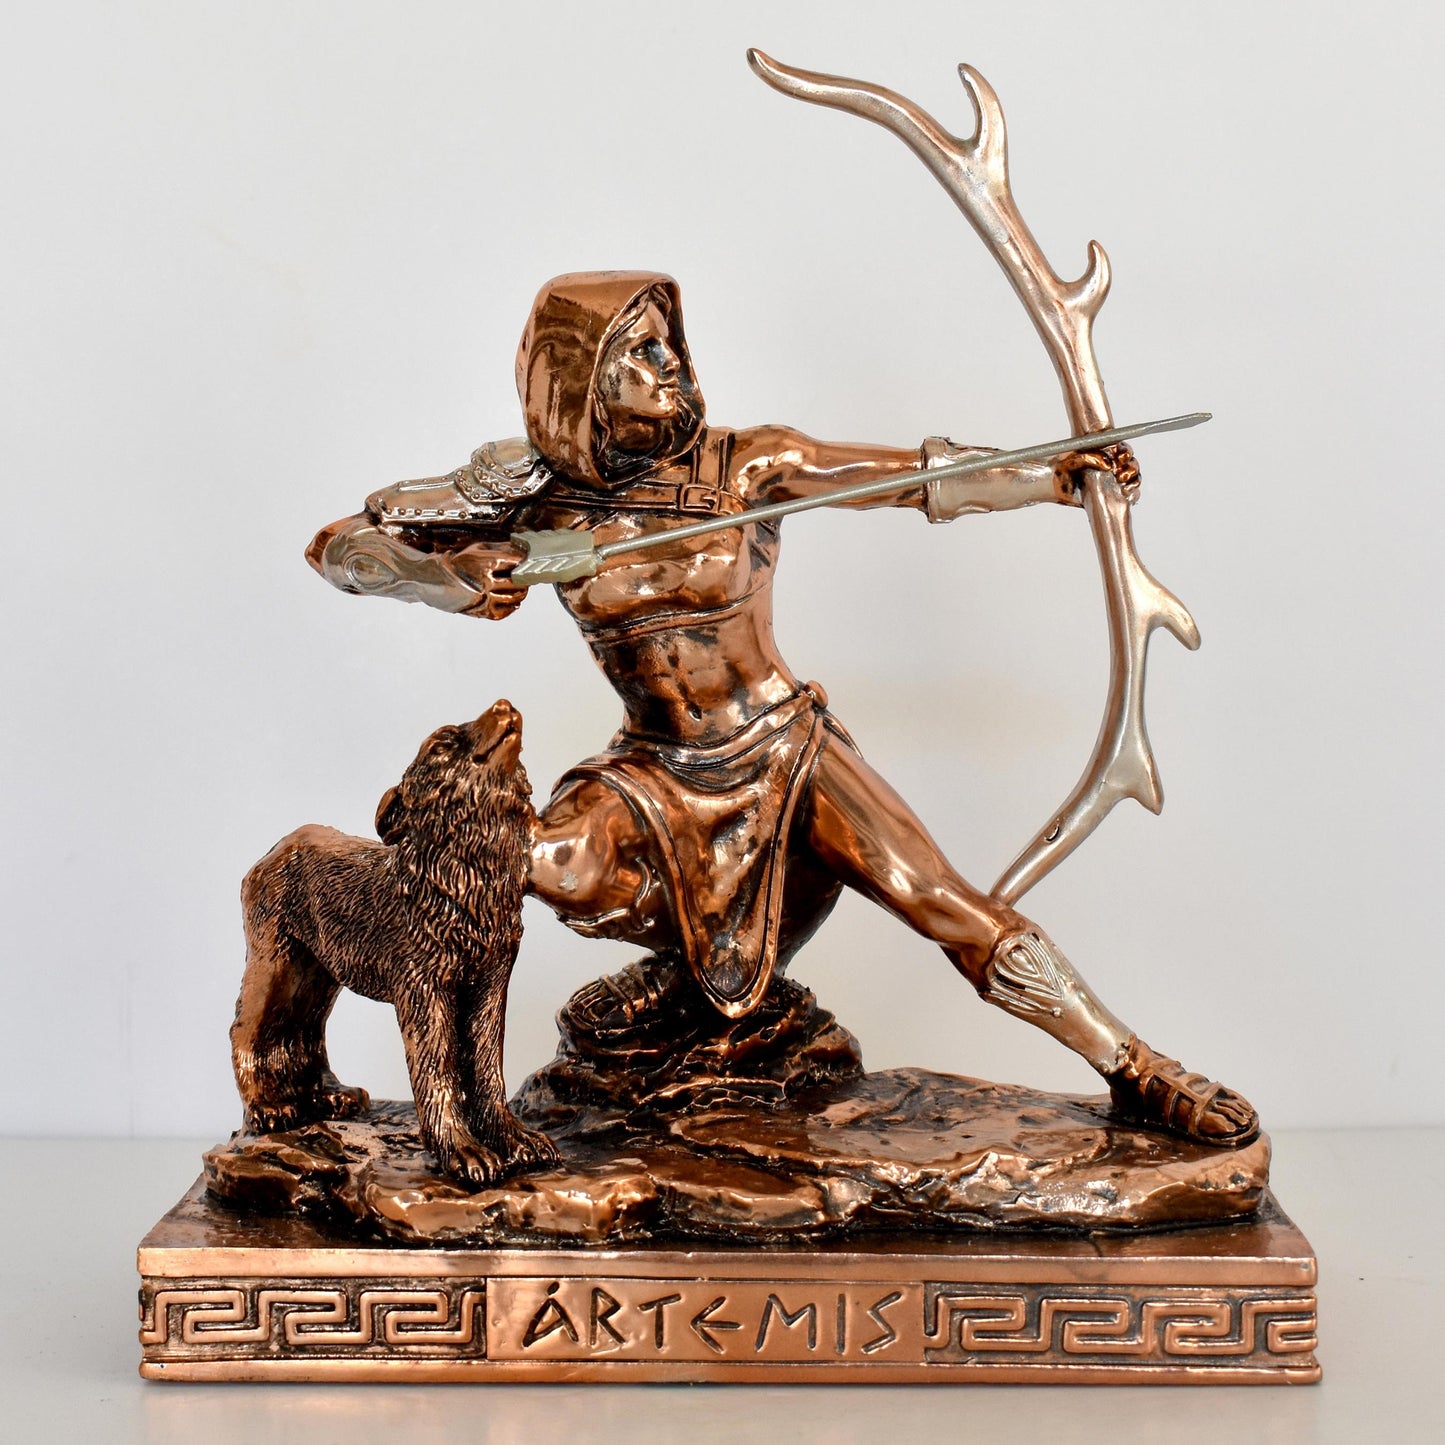 Artemis Diana – Greek Roman Goddess of Hunt, Wilderness, Wild Animals, the Moon, and Chastity - sister of Apollo - Copper Plated Alabaster